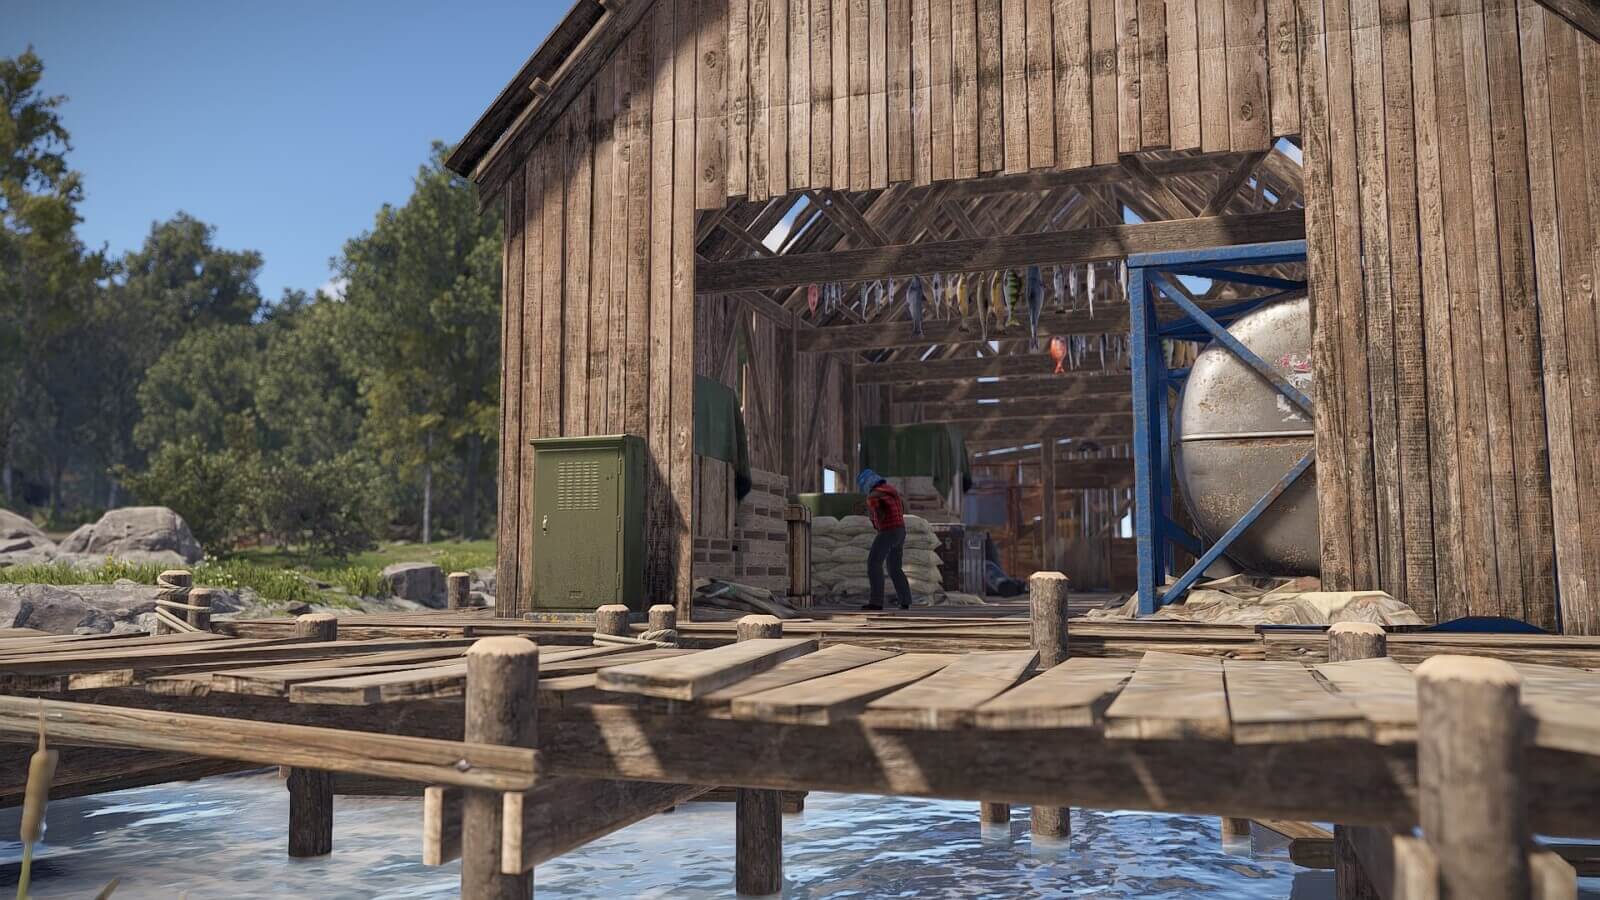 This tier 1 monument called shoreline village offers various crate spawn locations, food boxes, and barrels spread around.